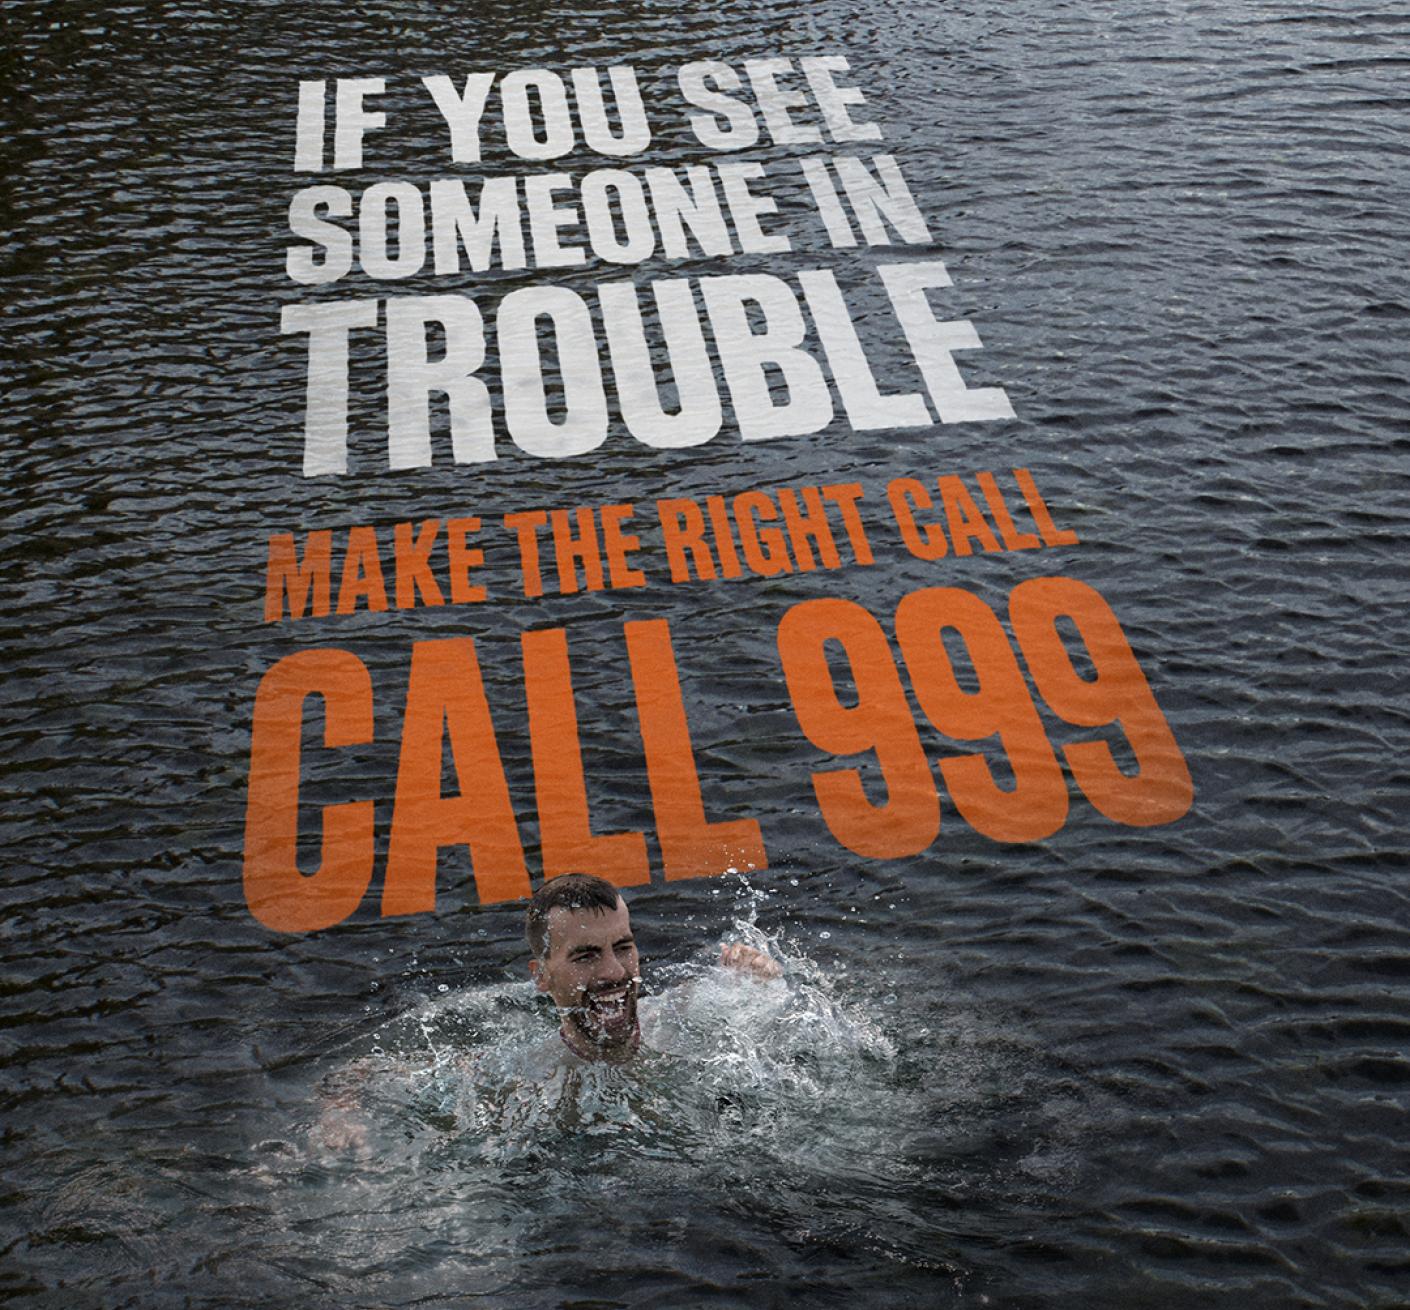 image reads: "If you see someone in trouble, make the right call, call 999."